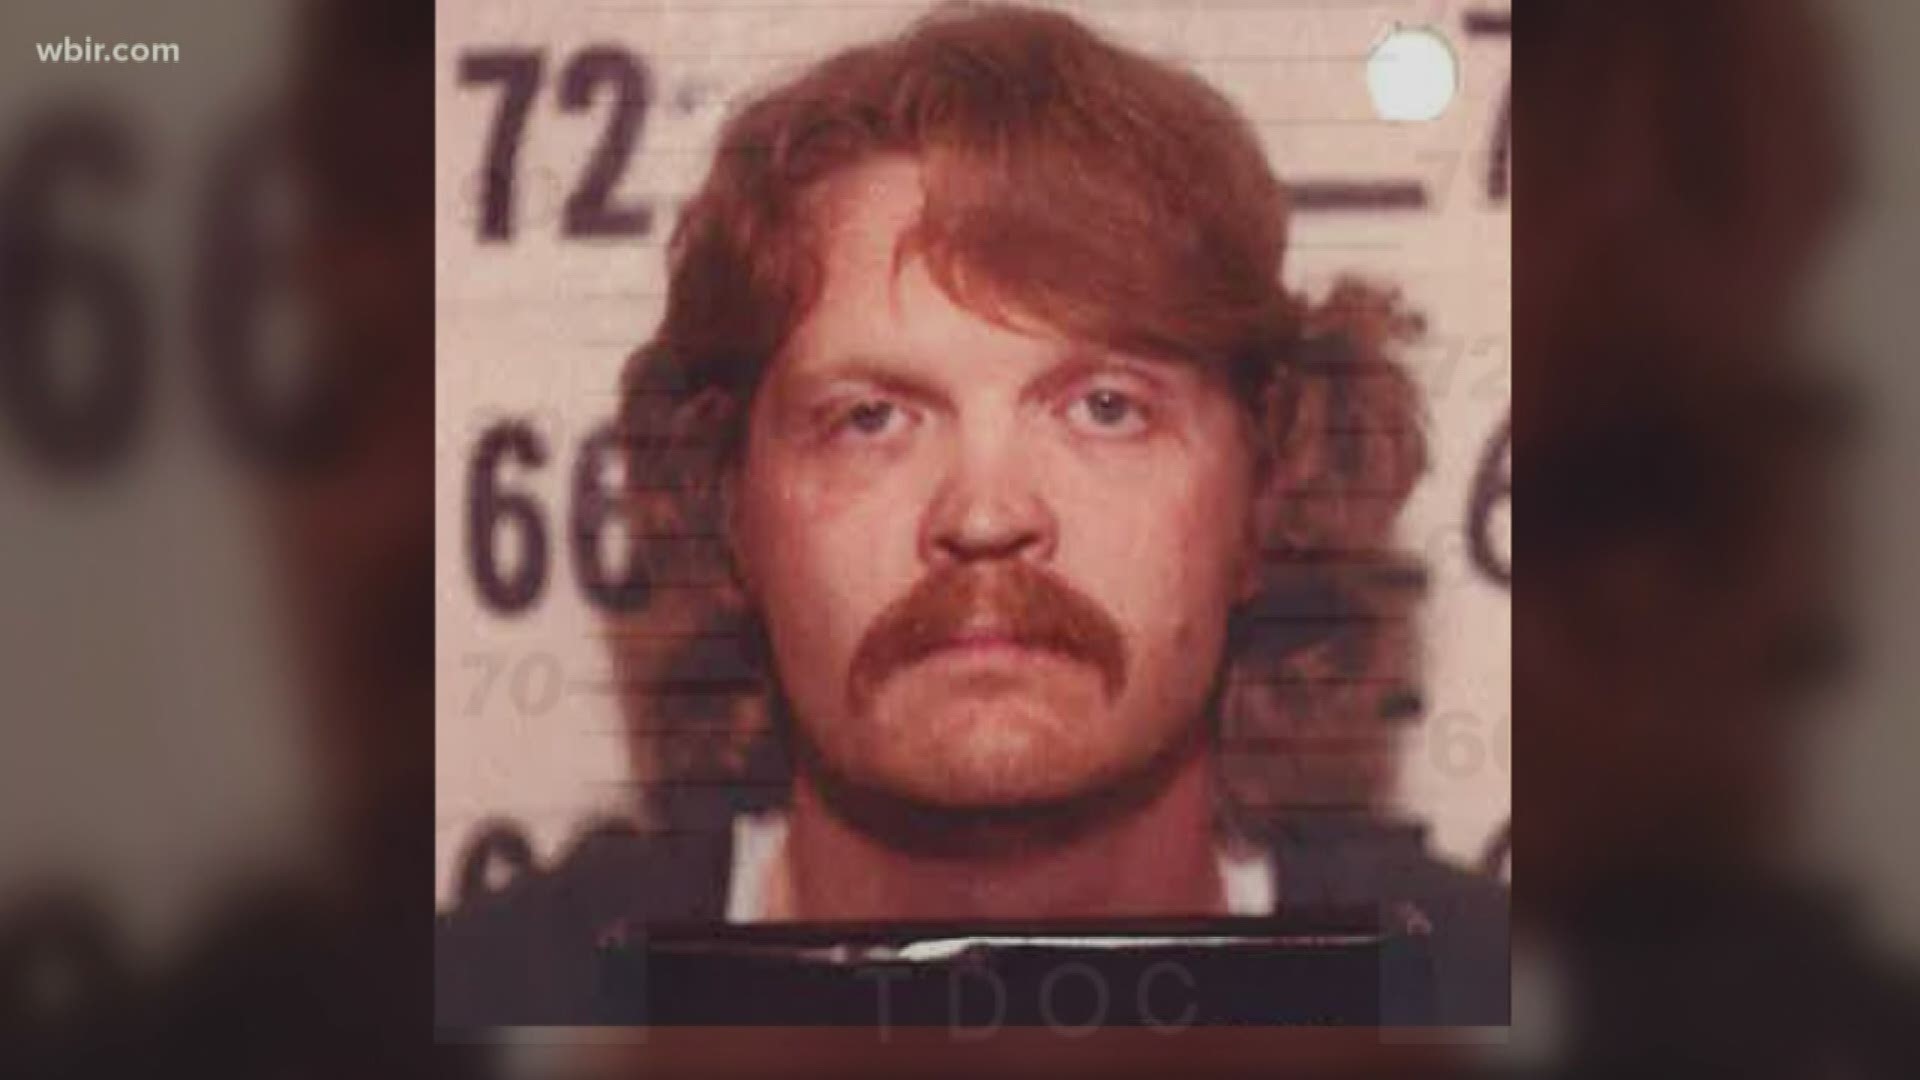 Jerry L. Johns worked as an independent trucker in the 1970s and 80s. Authorities are checking for links between his travels and numerous unsolved killings.